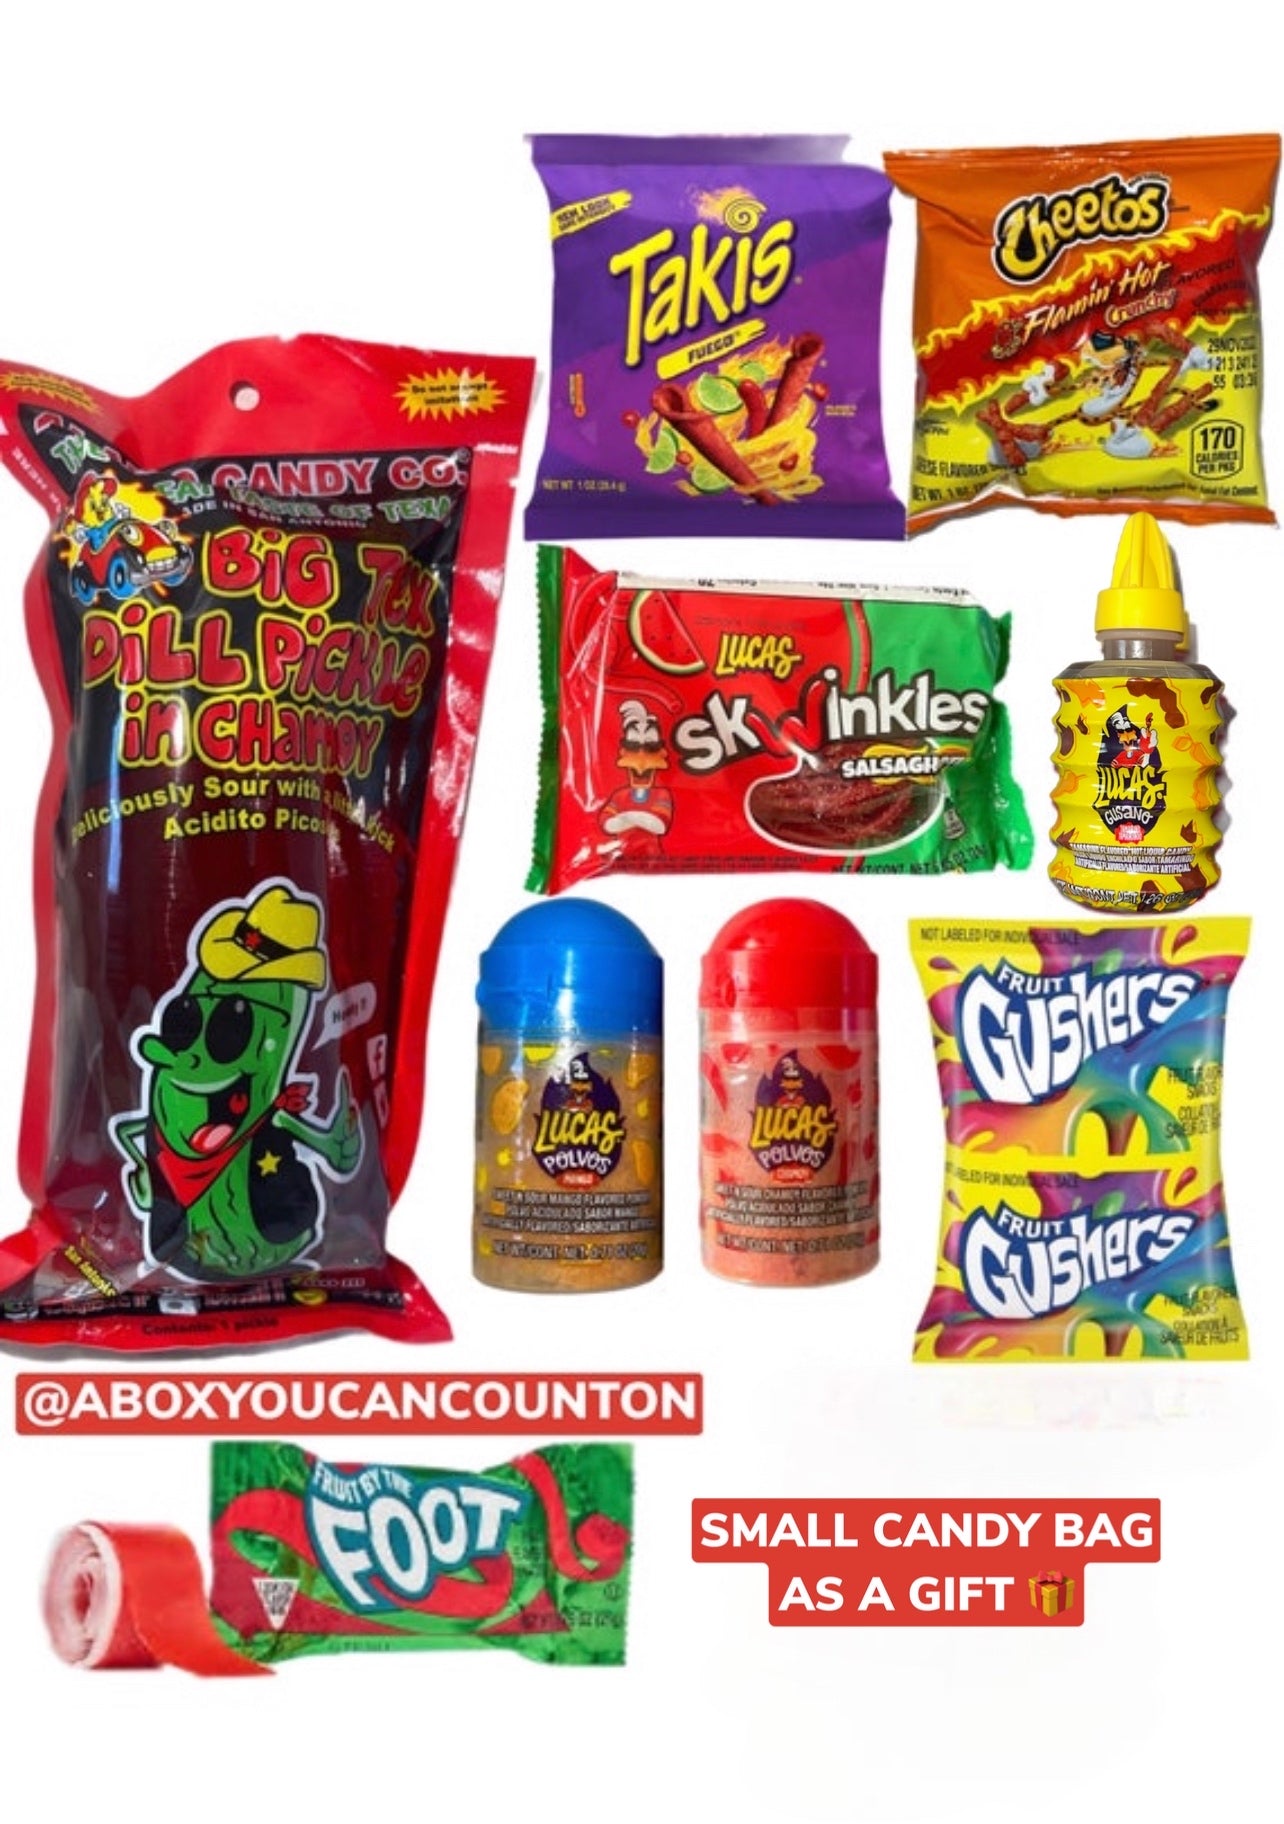 Chamoy Pickle Kit-Takis&Hot Cheetos Package Alamo Candy Co-Incudes 9 I – A  Box You Can Count On